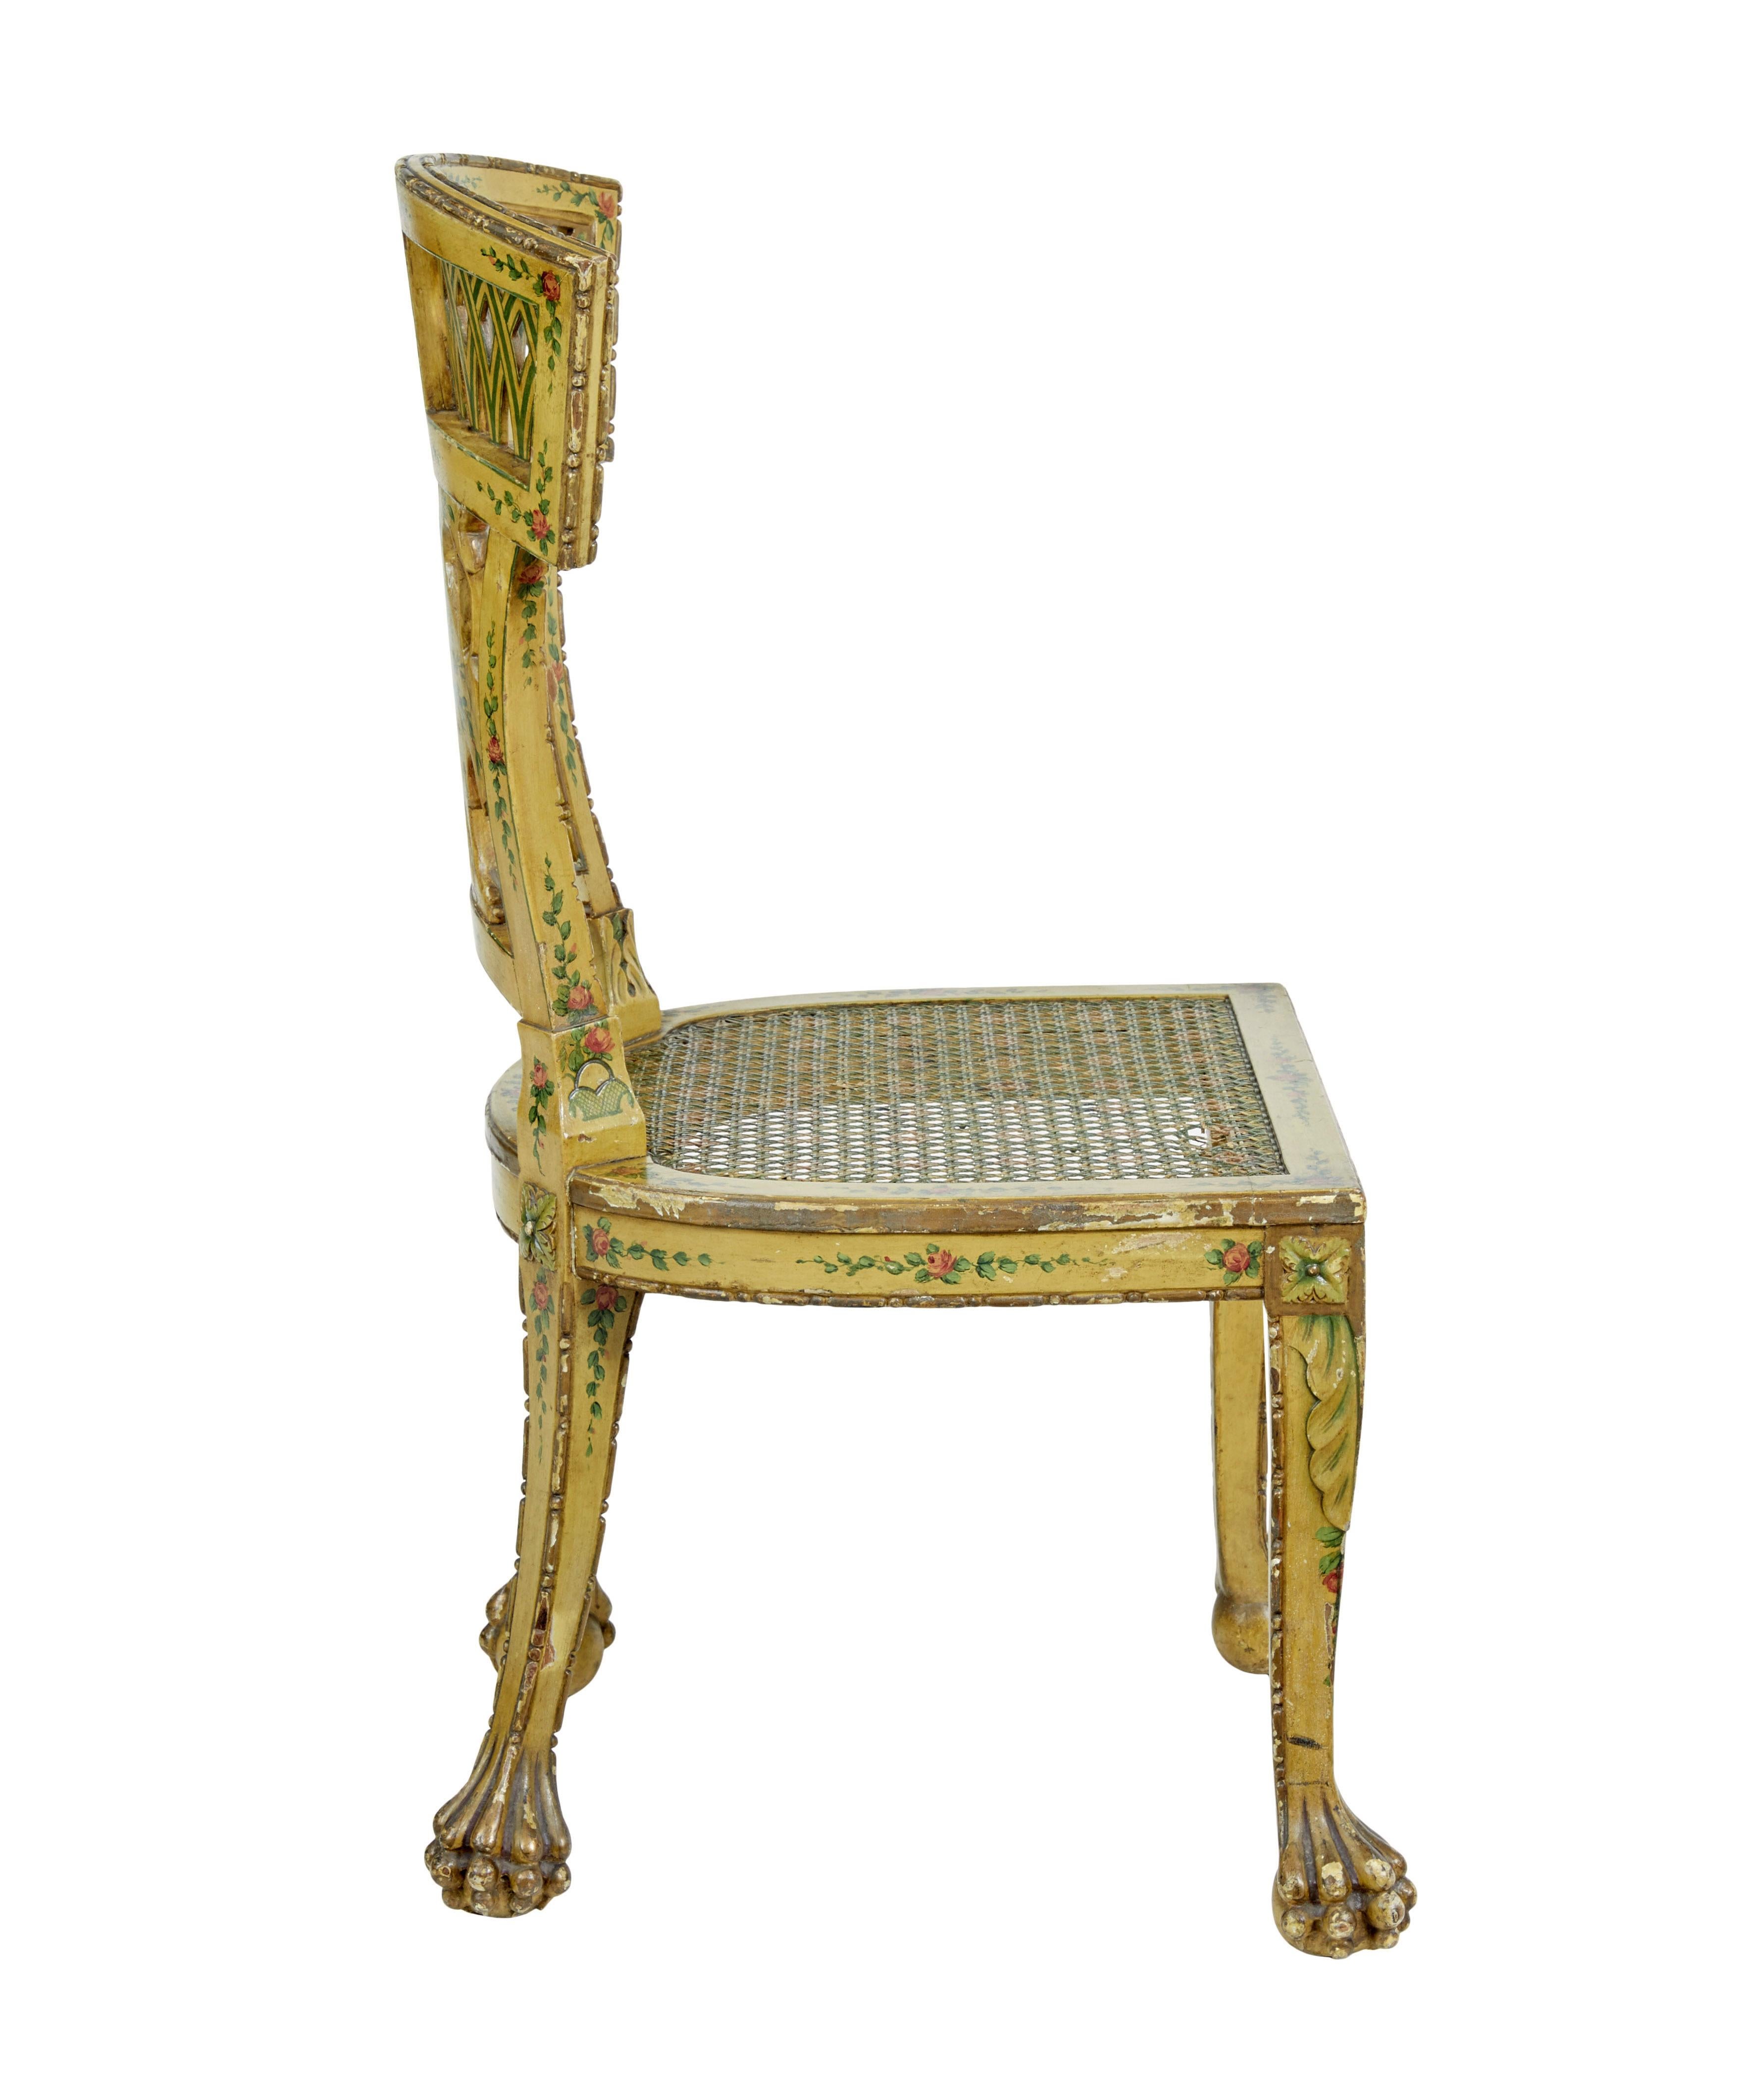 Austrian 19th century Biedermeier carved and painted cane chair For Sale